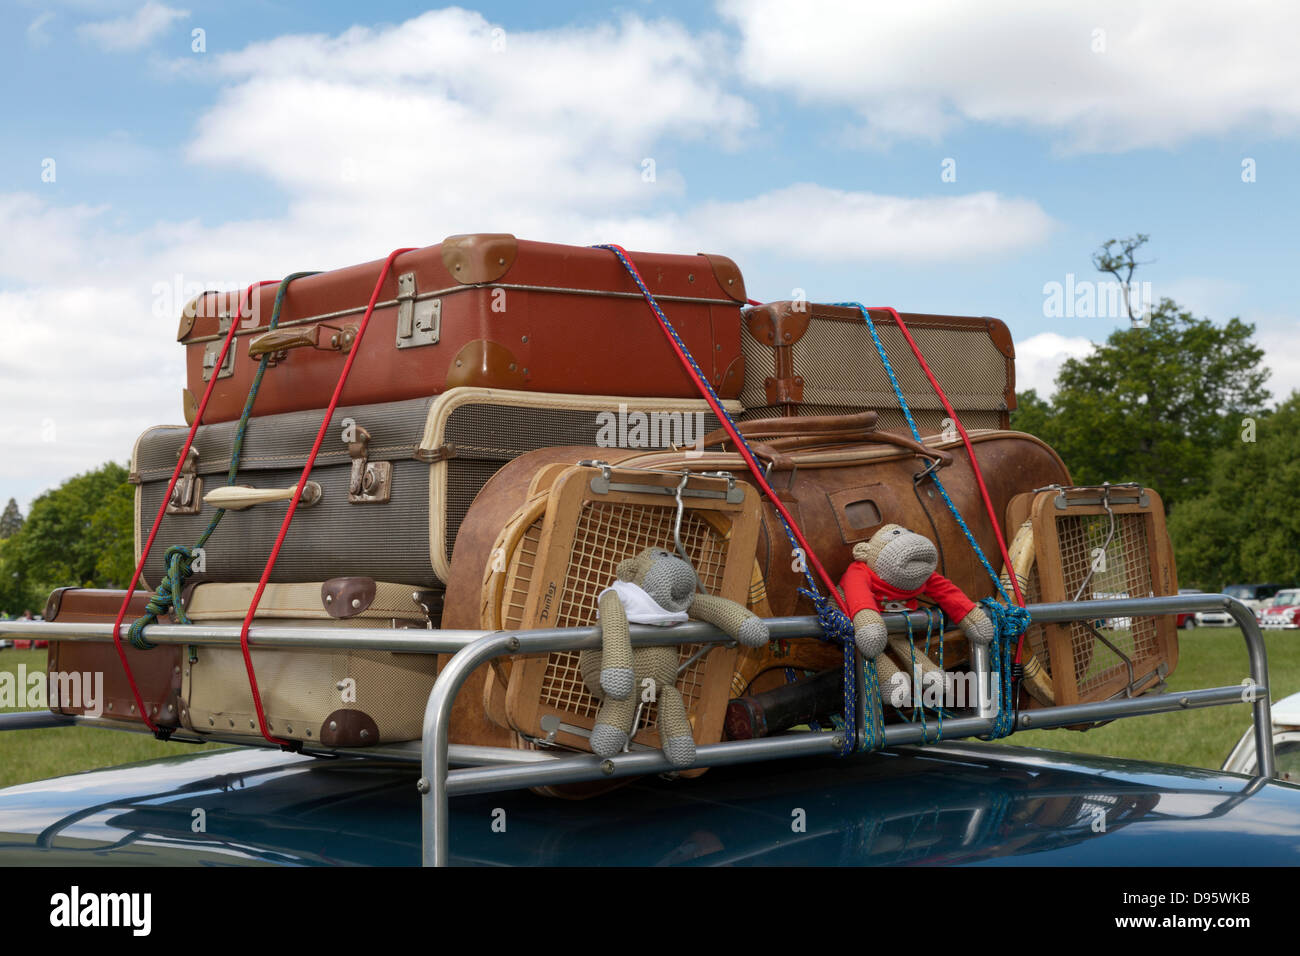 Old style fashioned luggage suitcases on car roof rack 